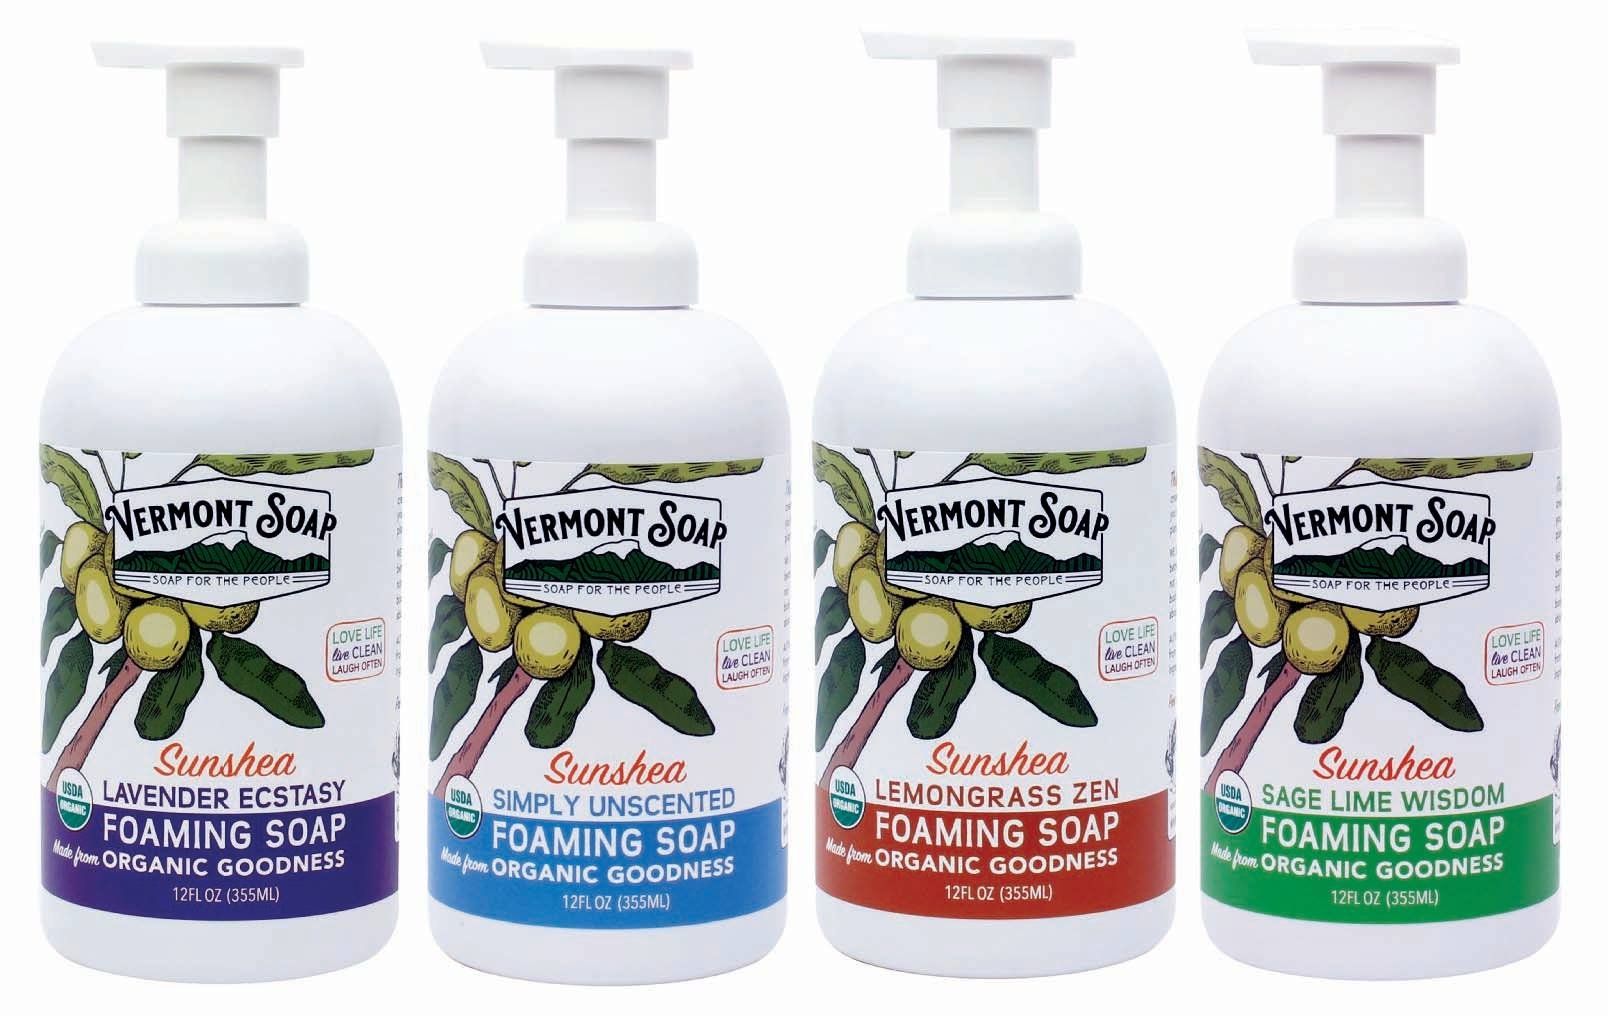 Vermont Soap Products